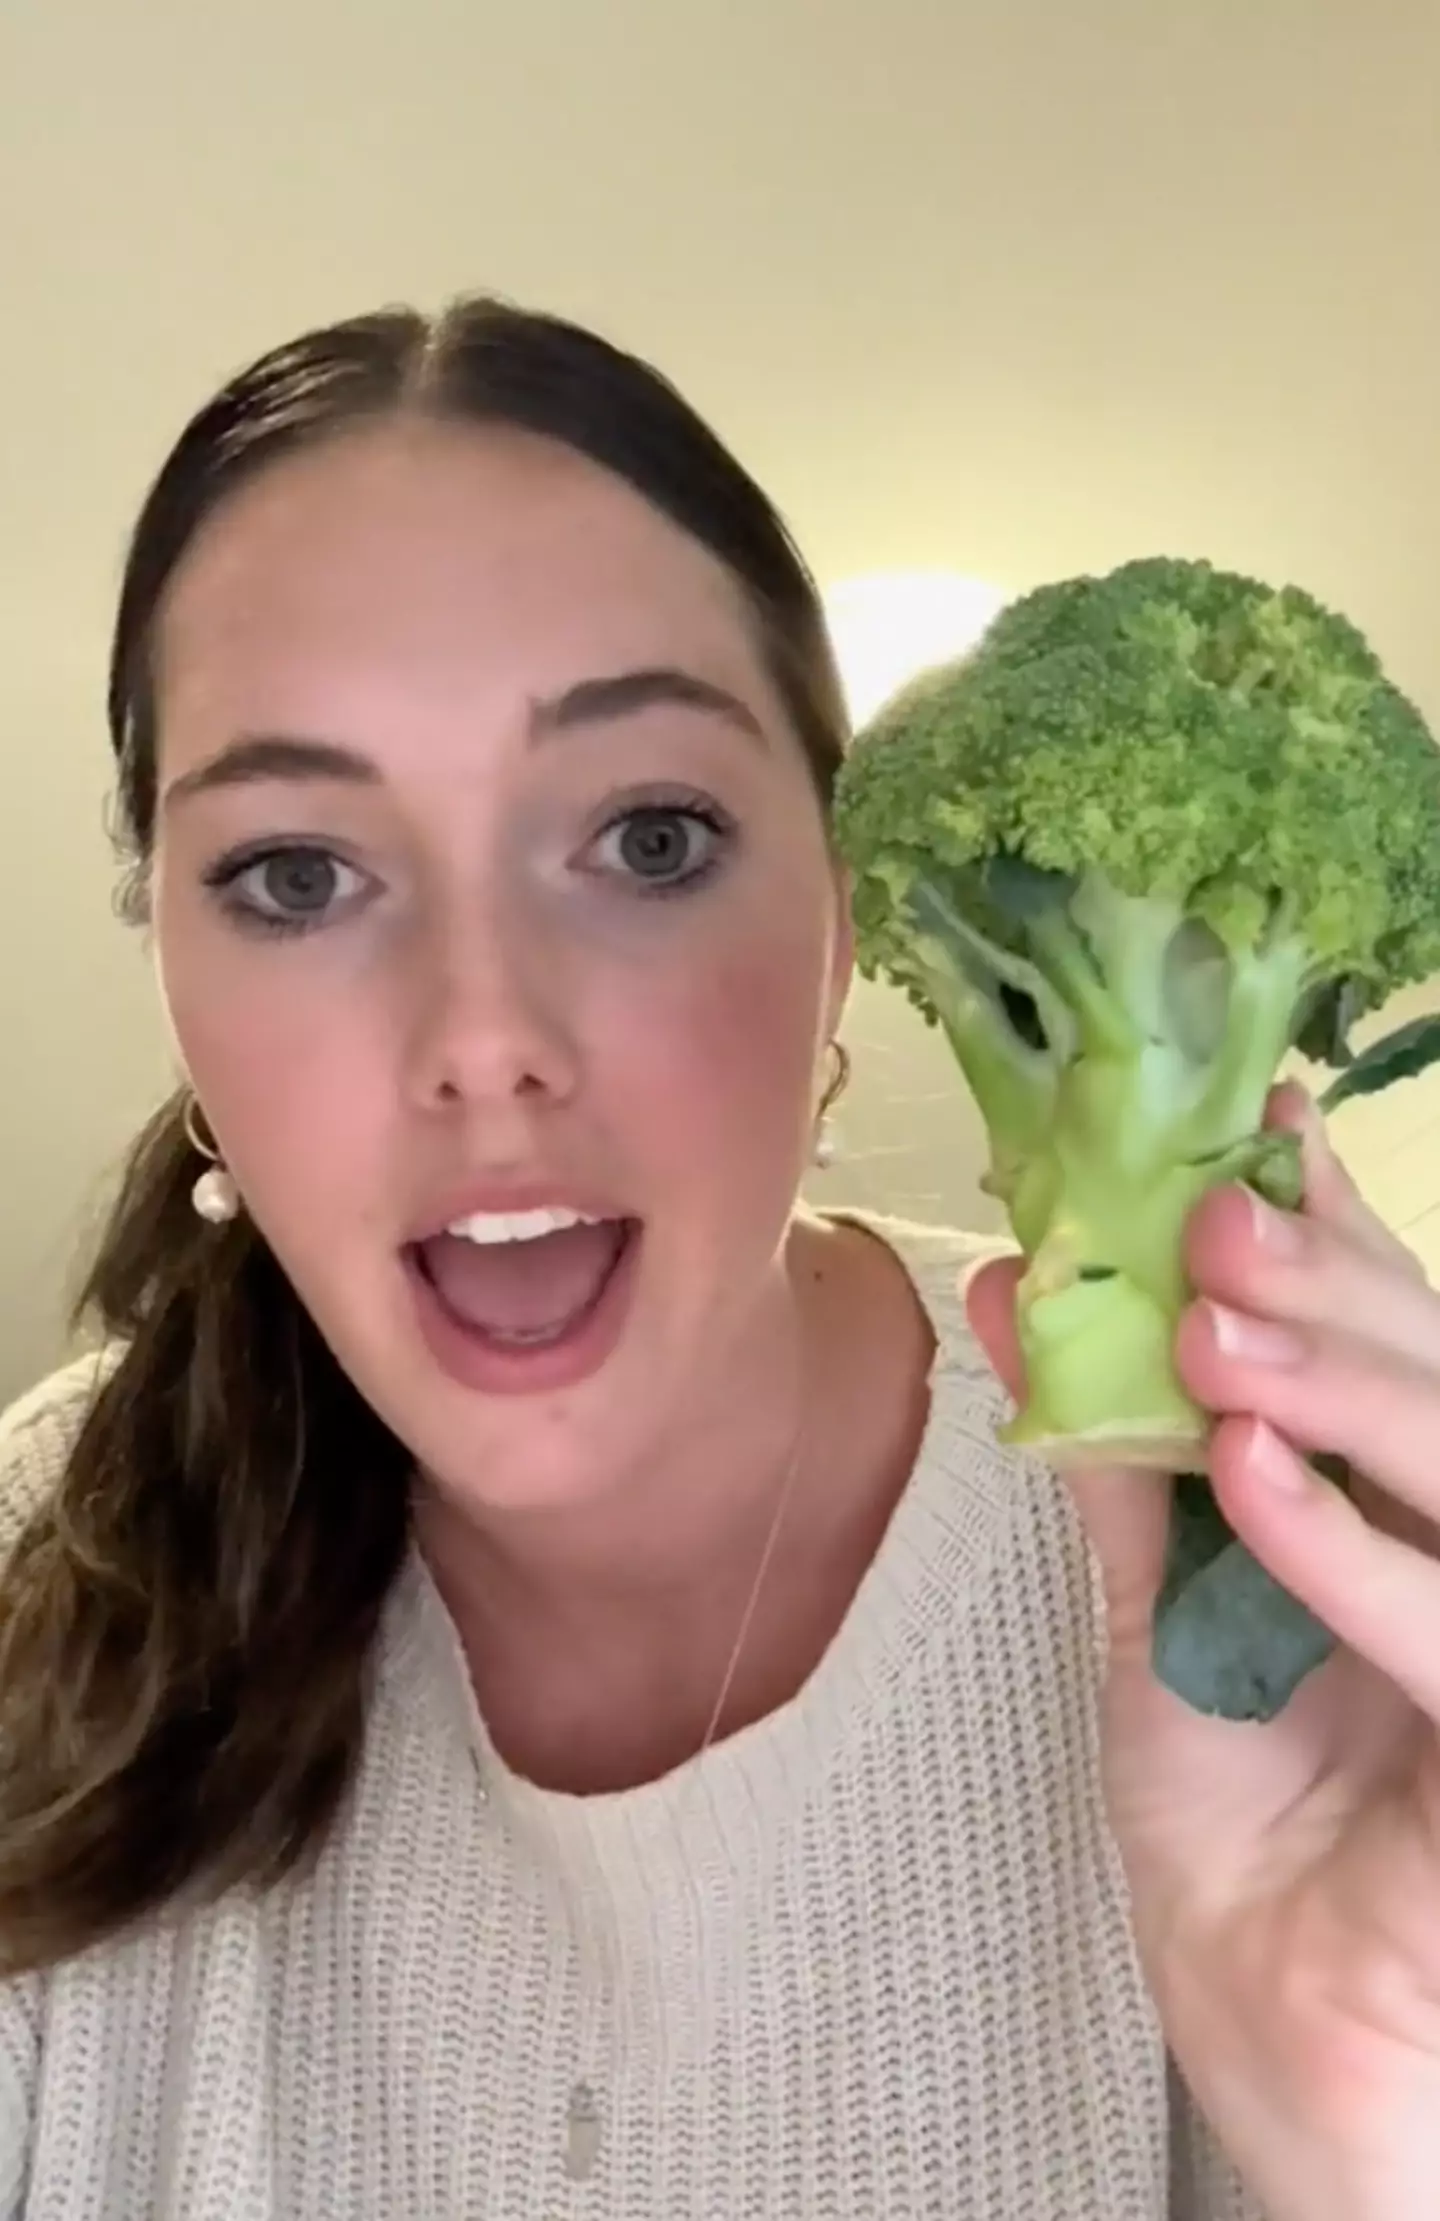 People were surprised at how Kate was pronouncing 'broccoli'.